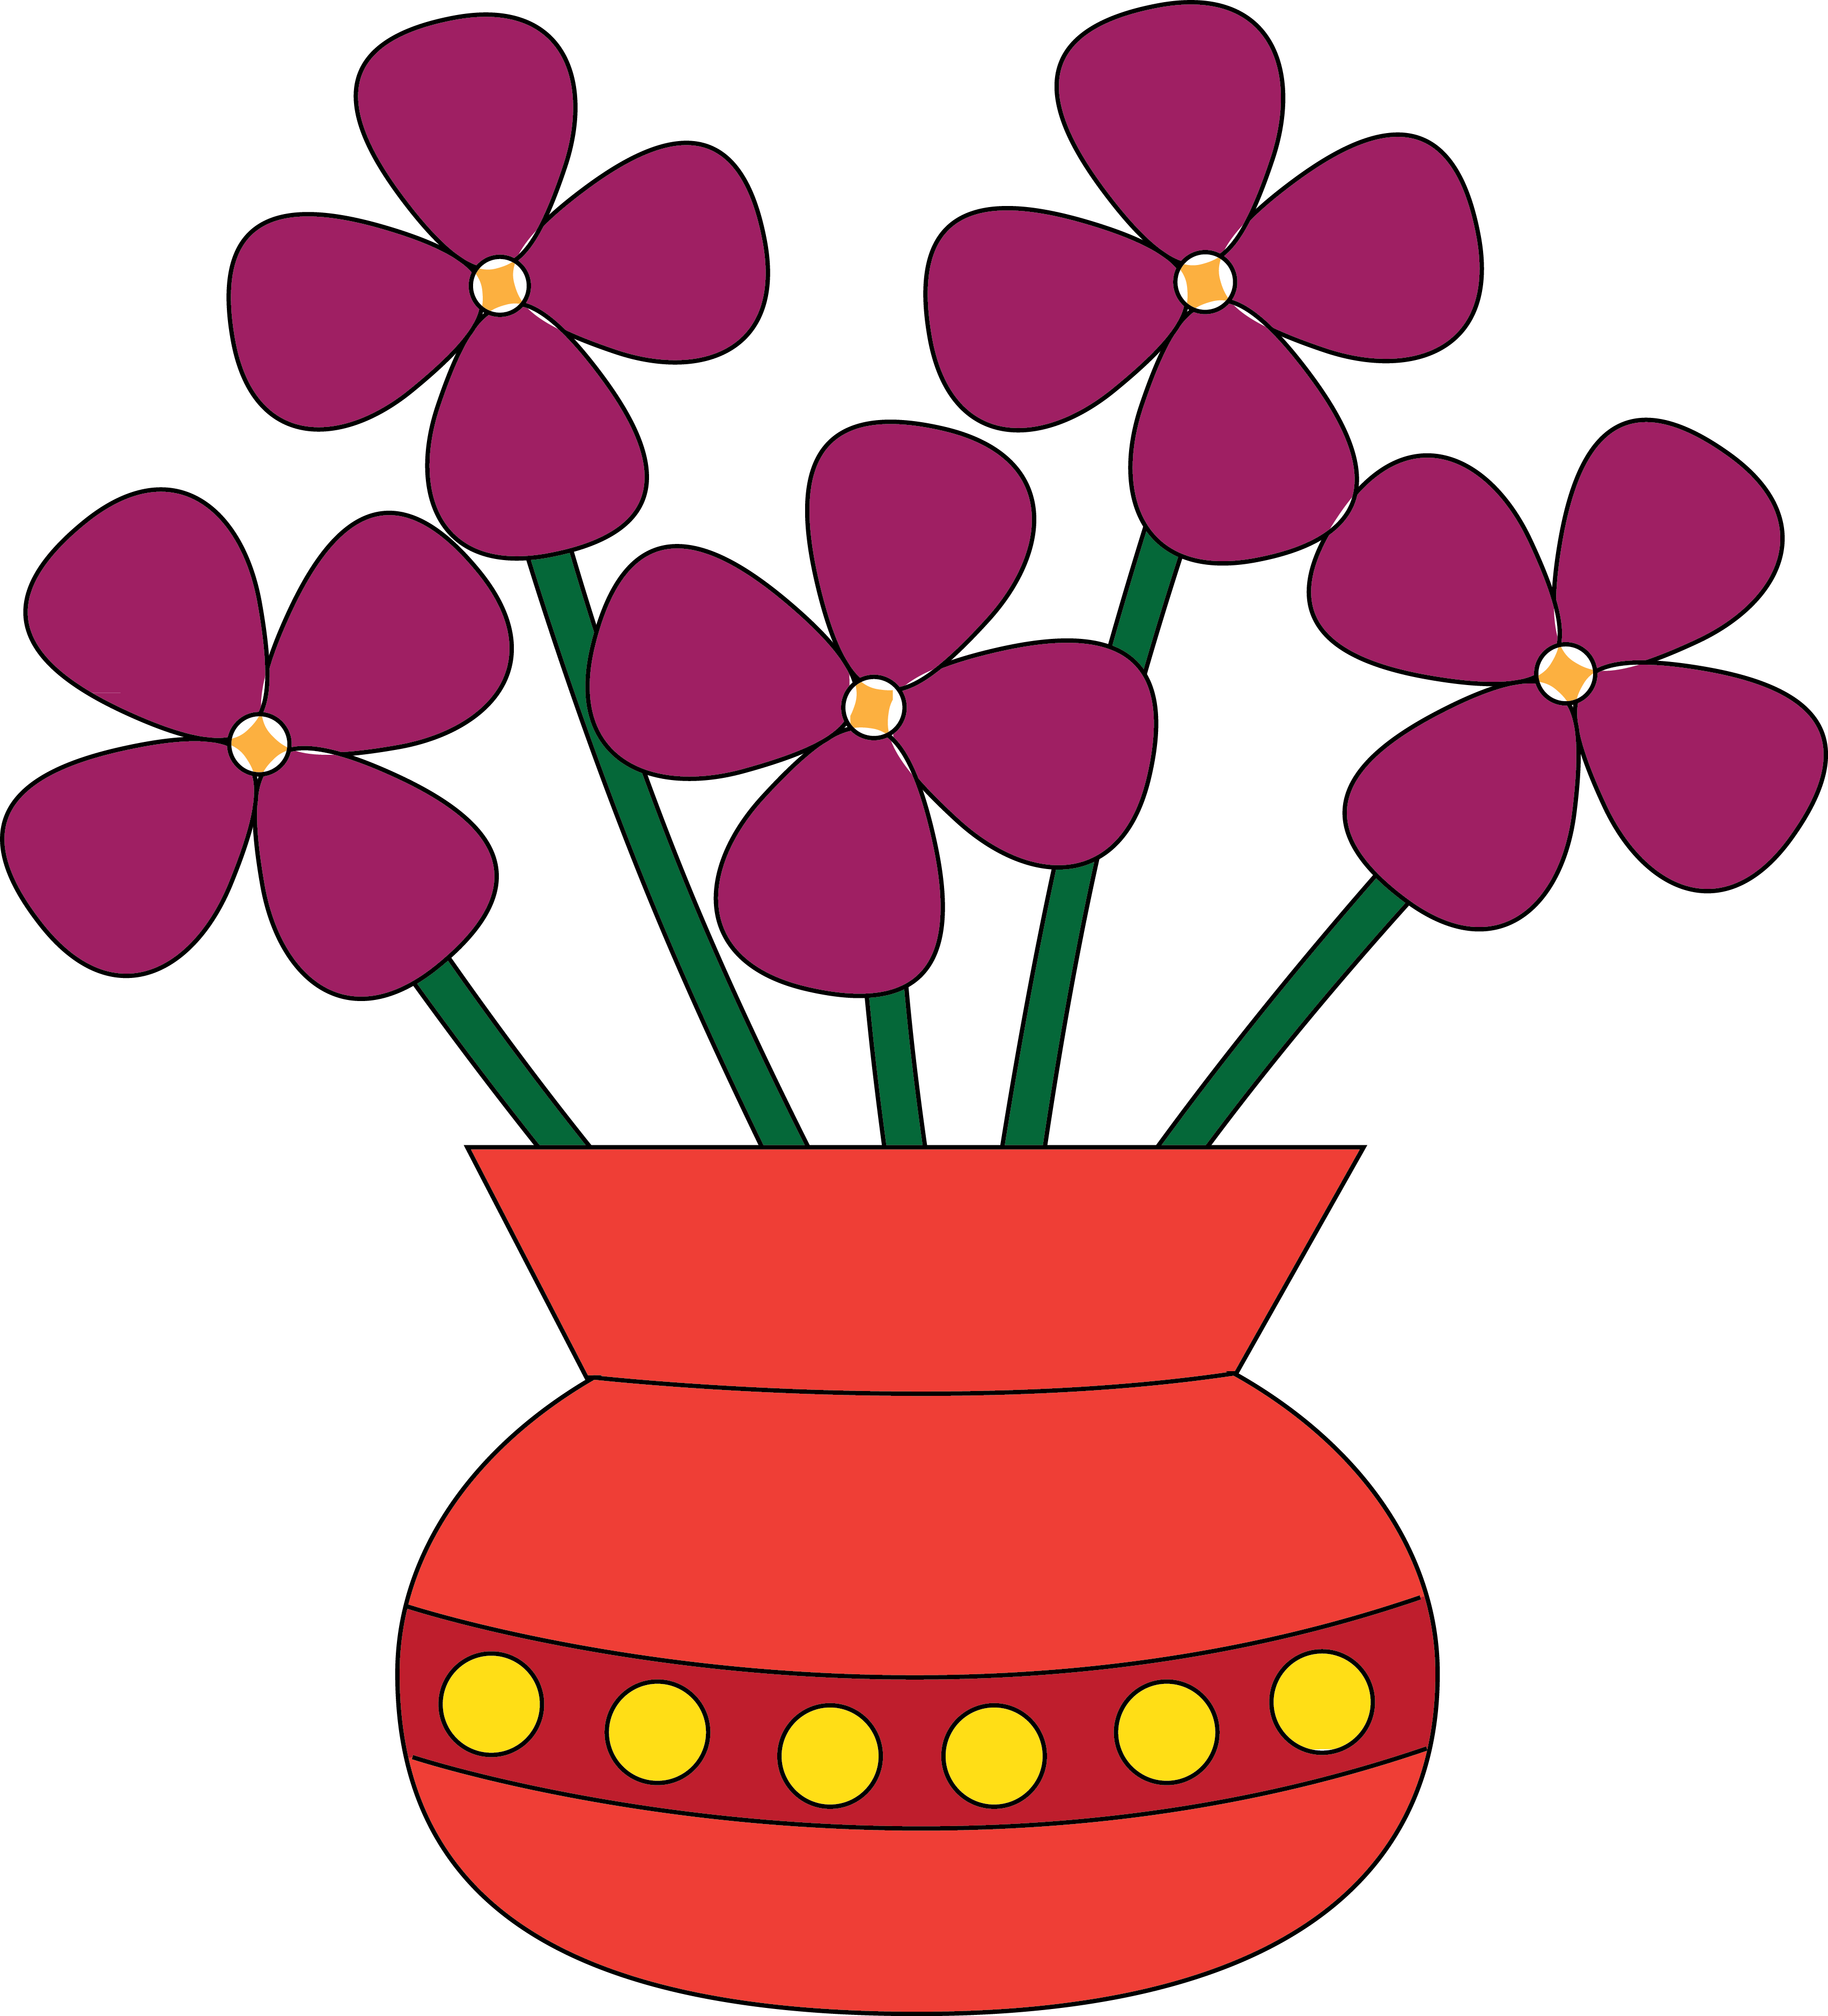 Free Flower Clipart Images - ClipArt Best